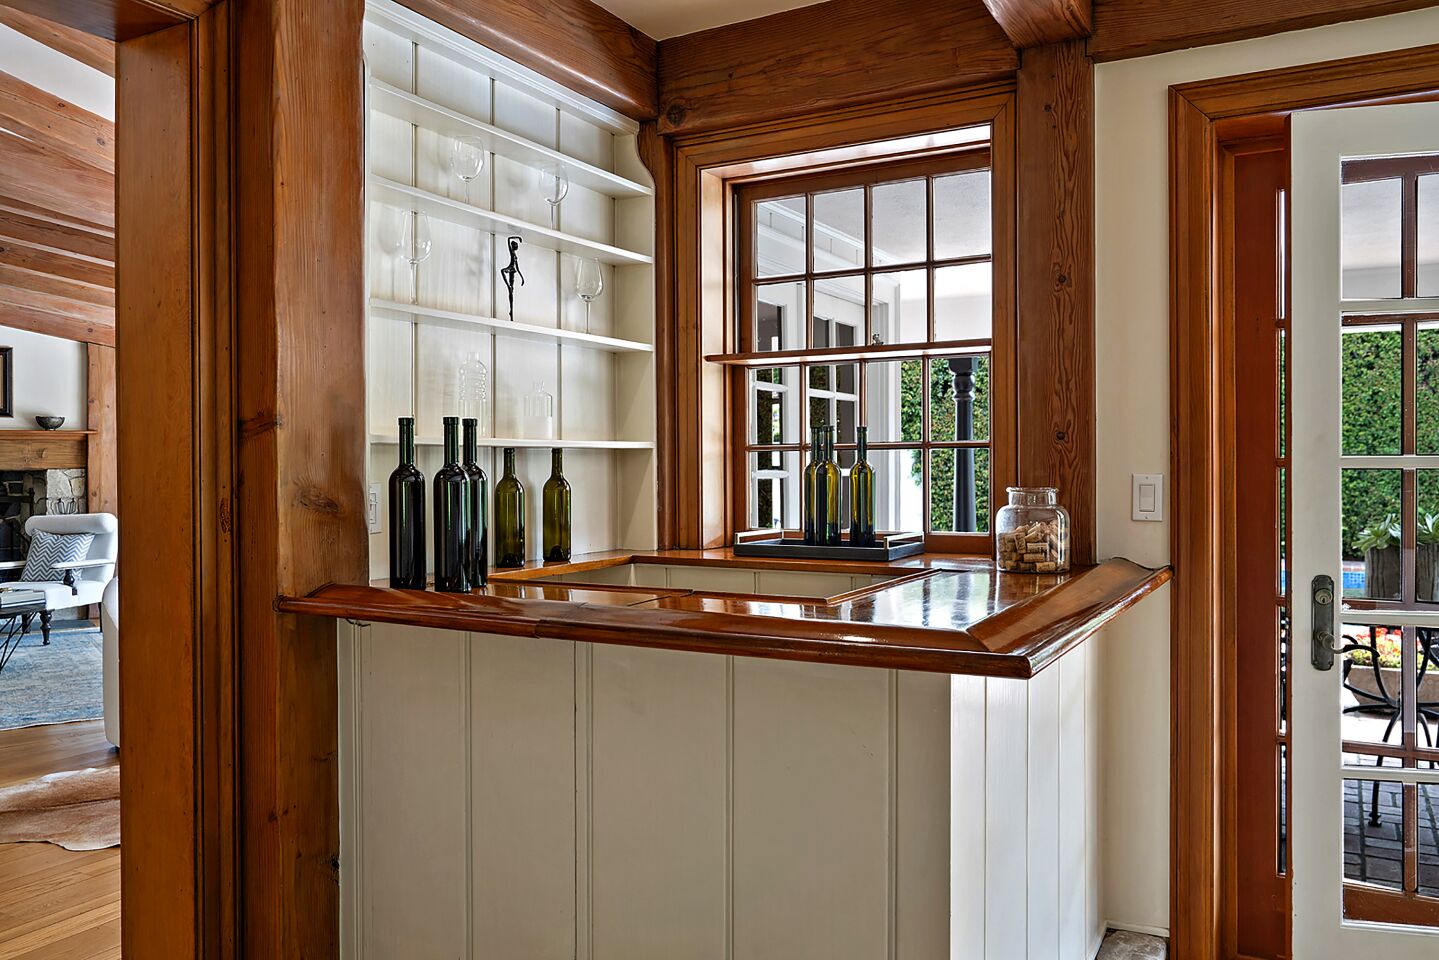 Features in the Country Colonial-style home include a built-in wet bar.